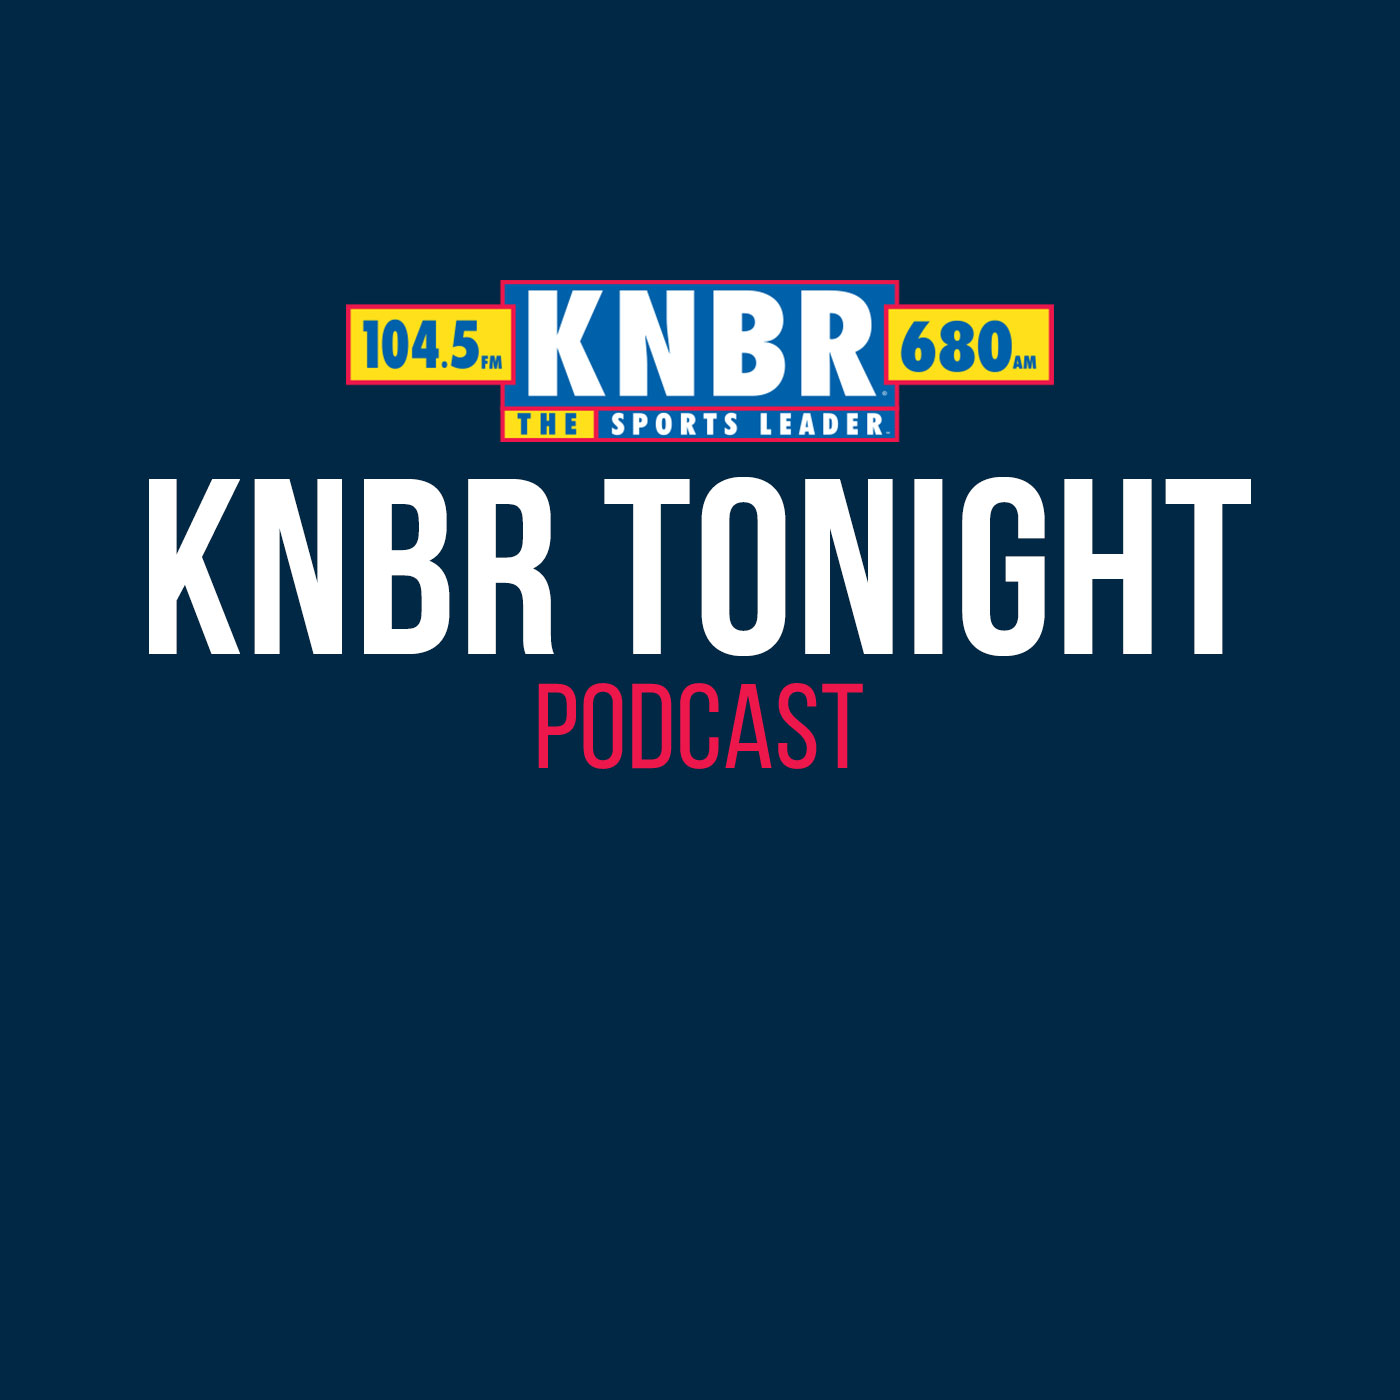 4-13 Evan Webeck joins KNBR Tonight to discuss how dominant the Giants pitching rotation has been and it doesn't look like it will go away any time soon